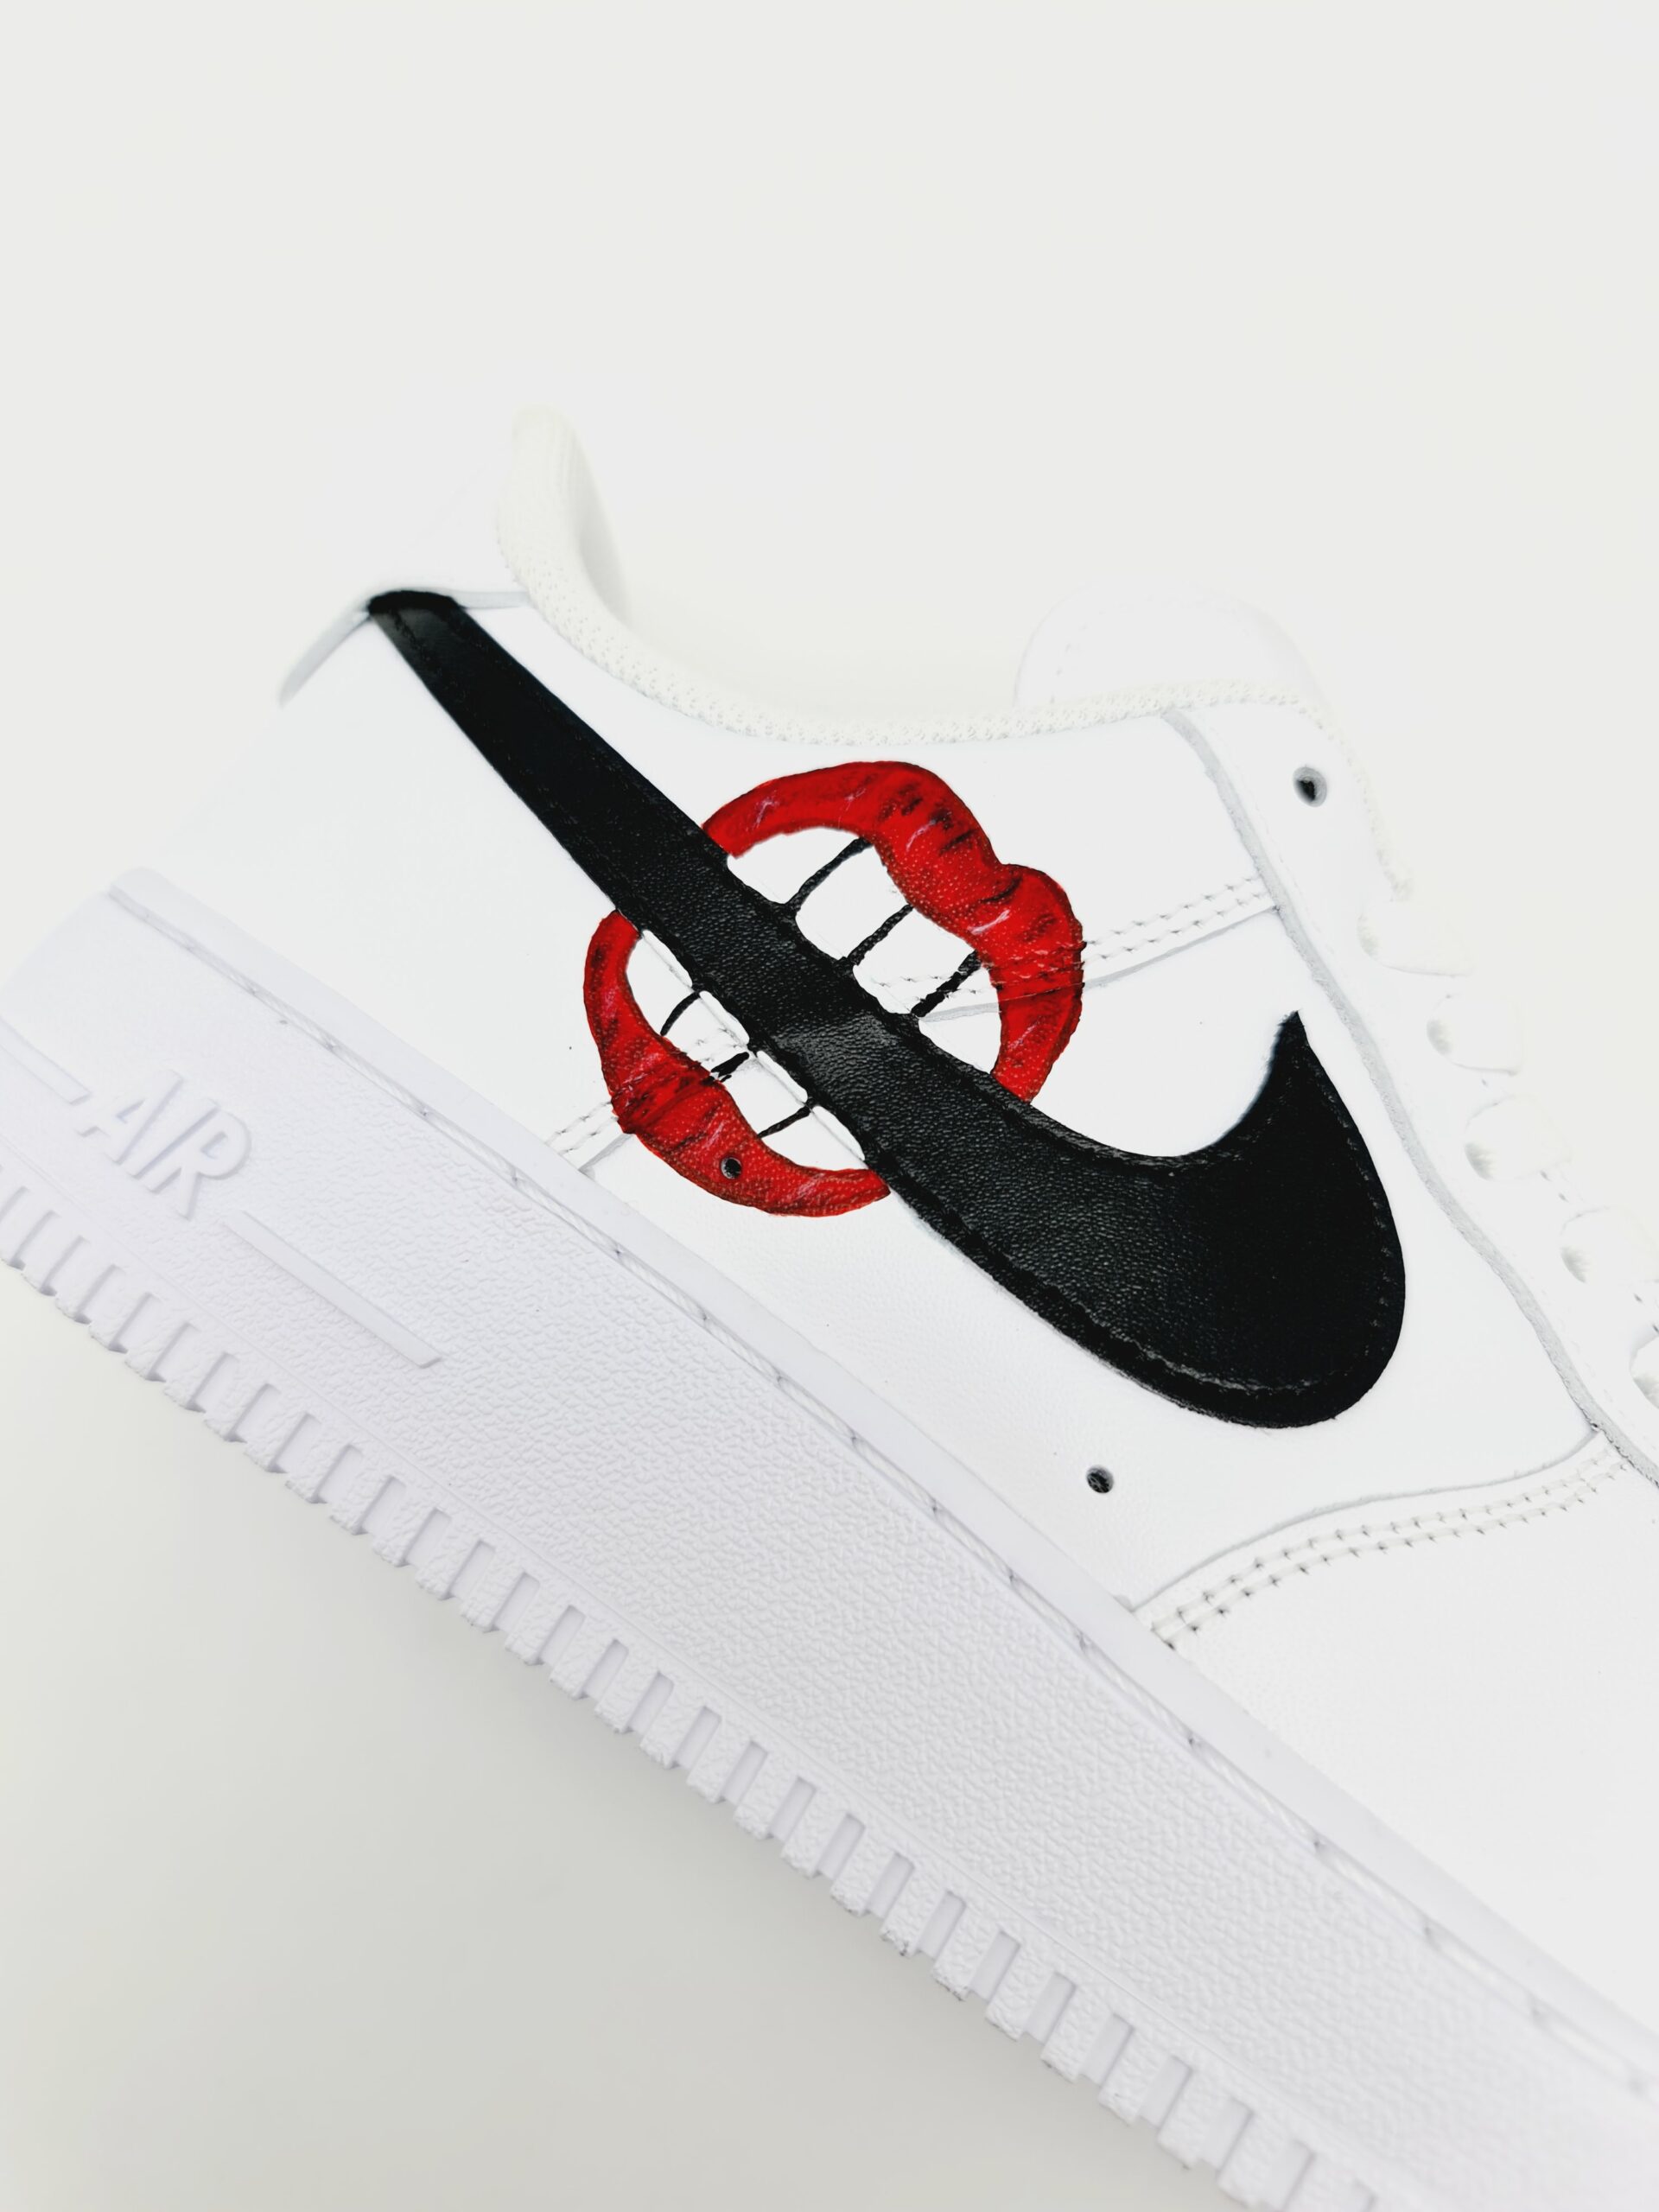 Customized Nike air force one in a streetwear style